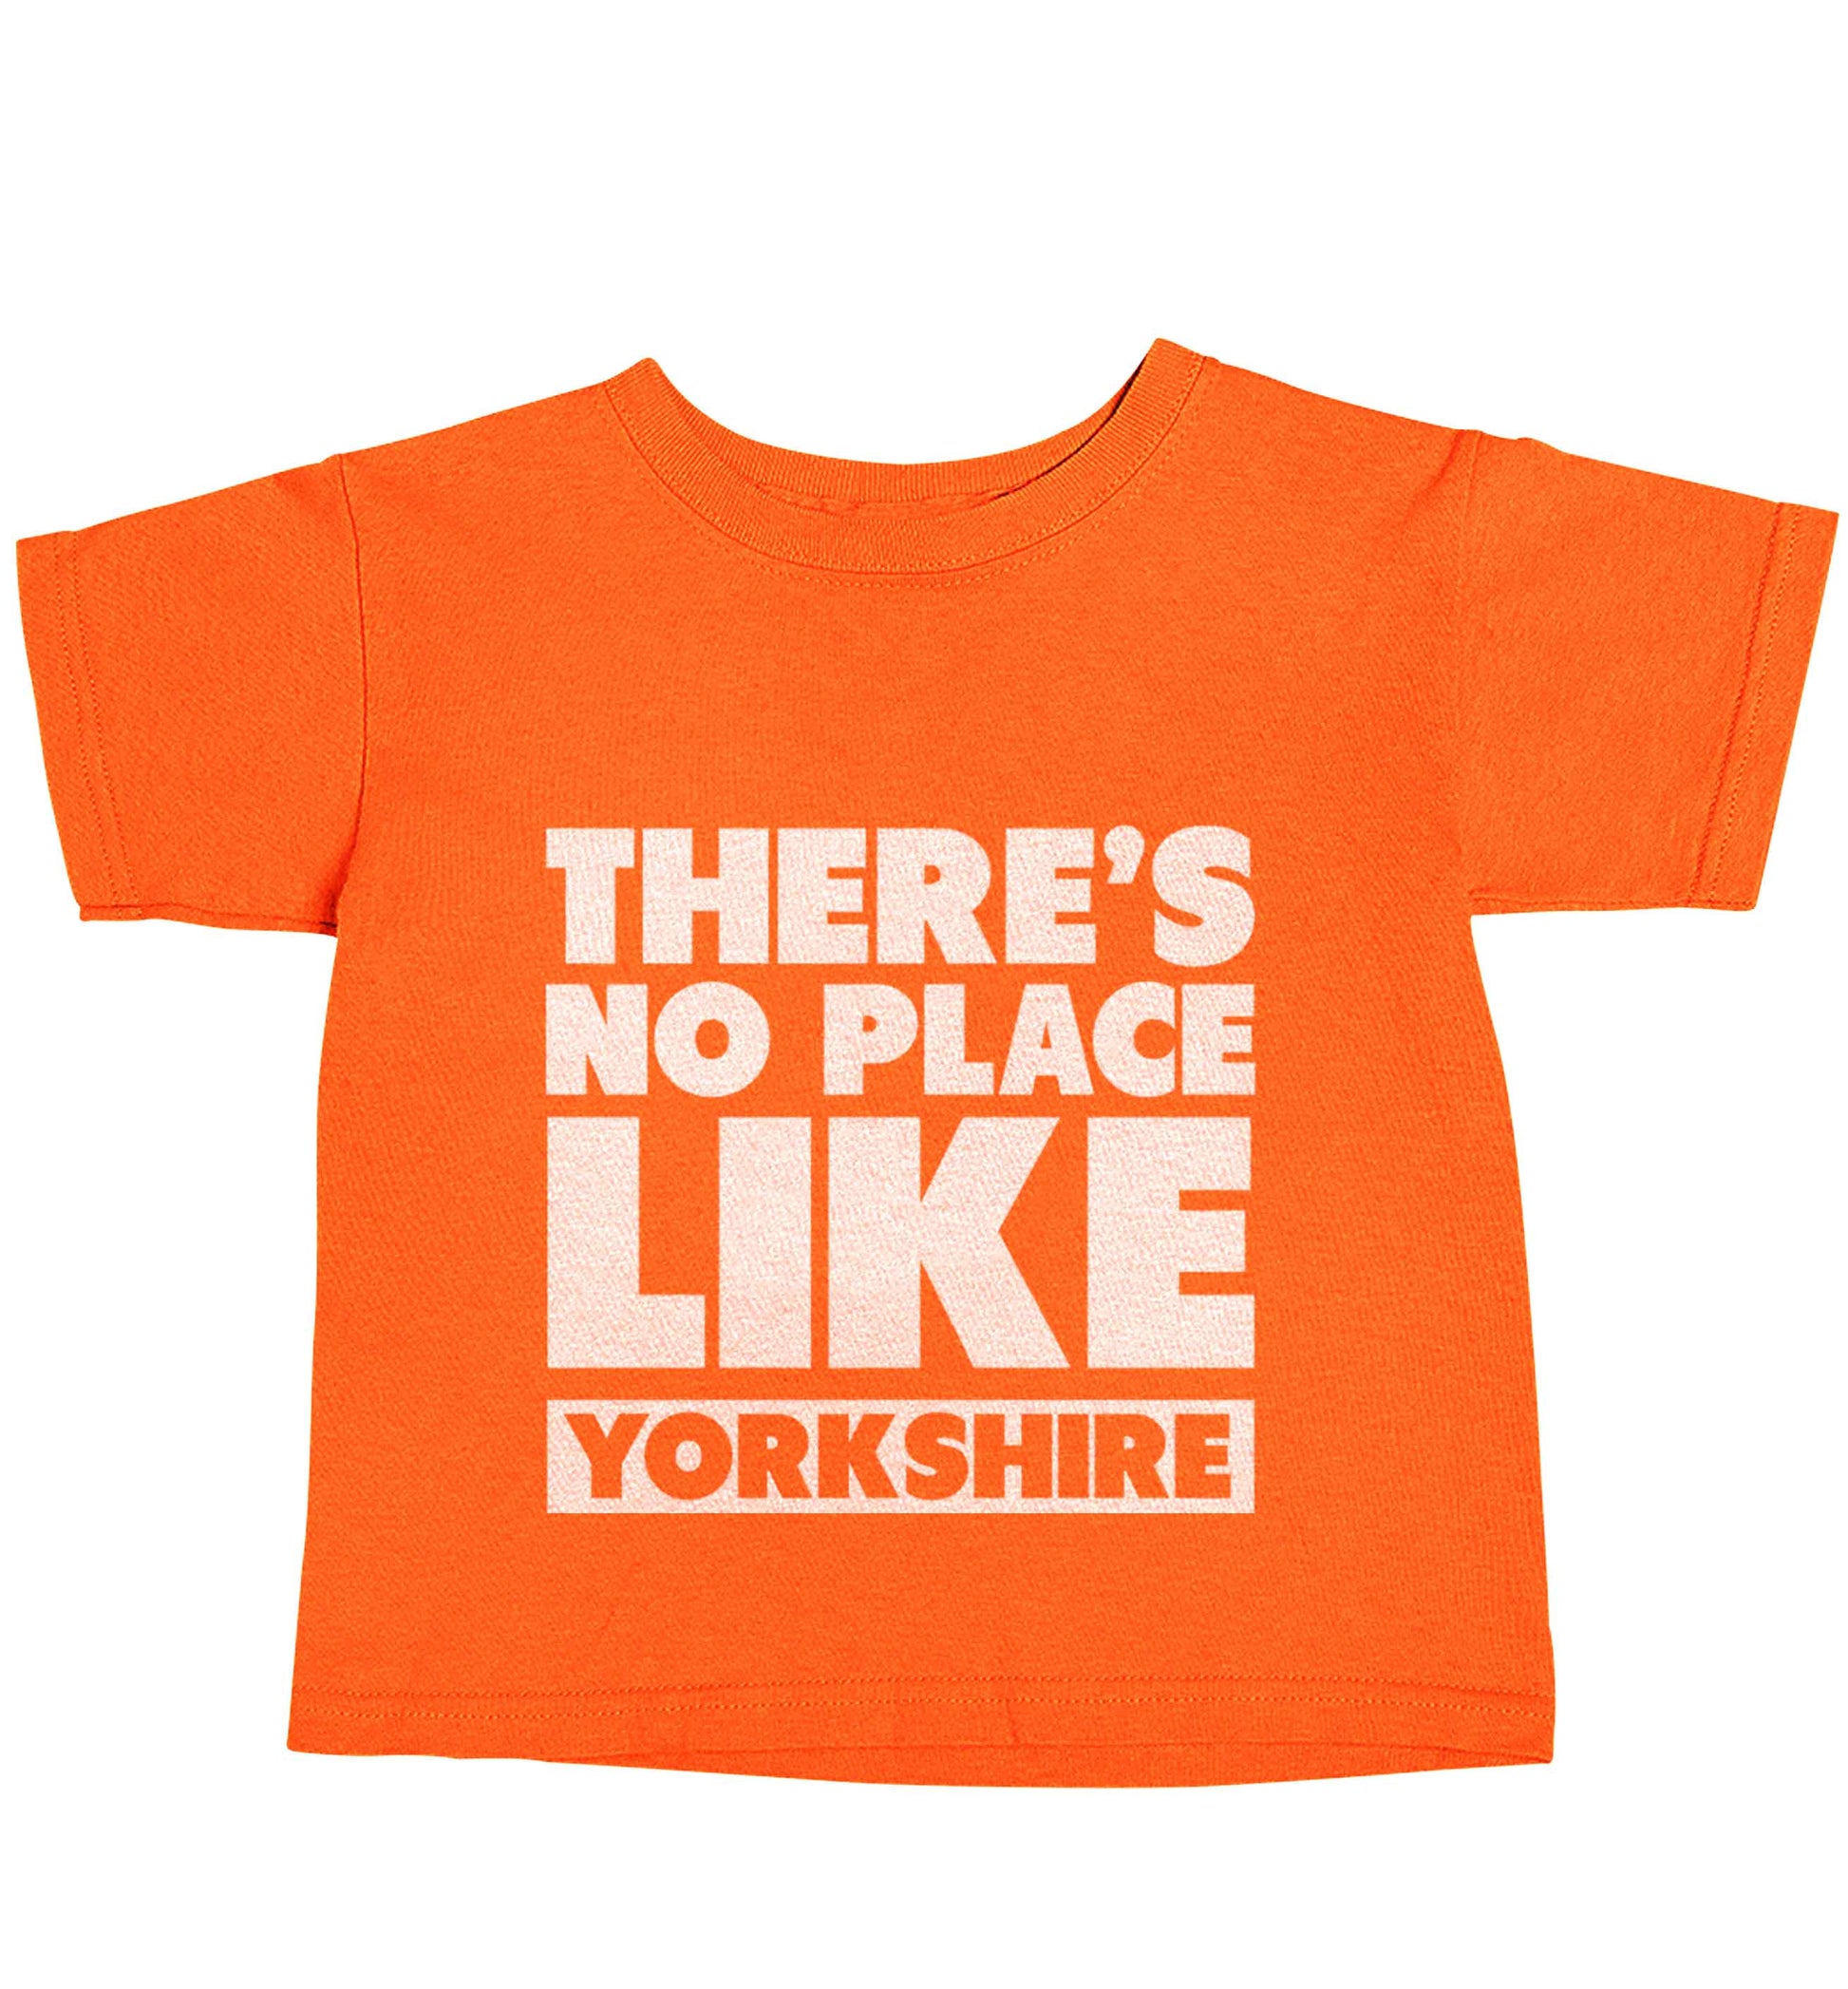 There's no place like Yorkshire orange baby toddler Tshirt 2 Years